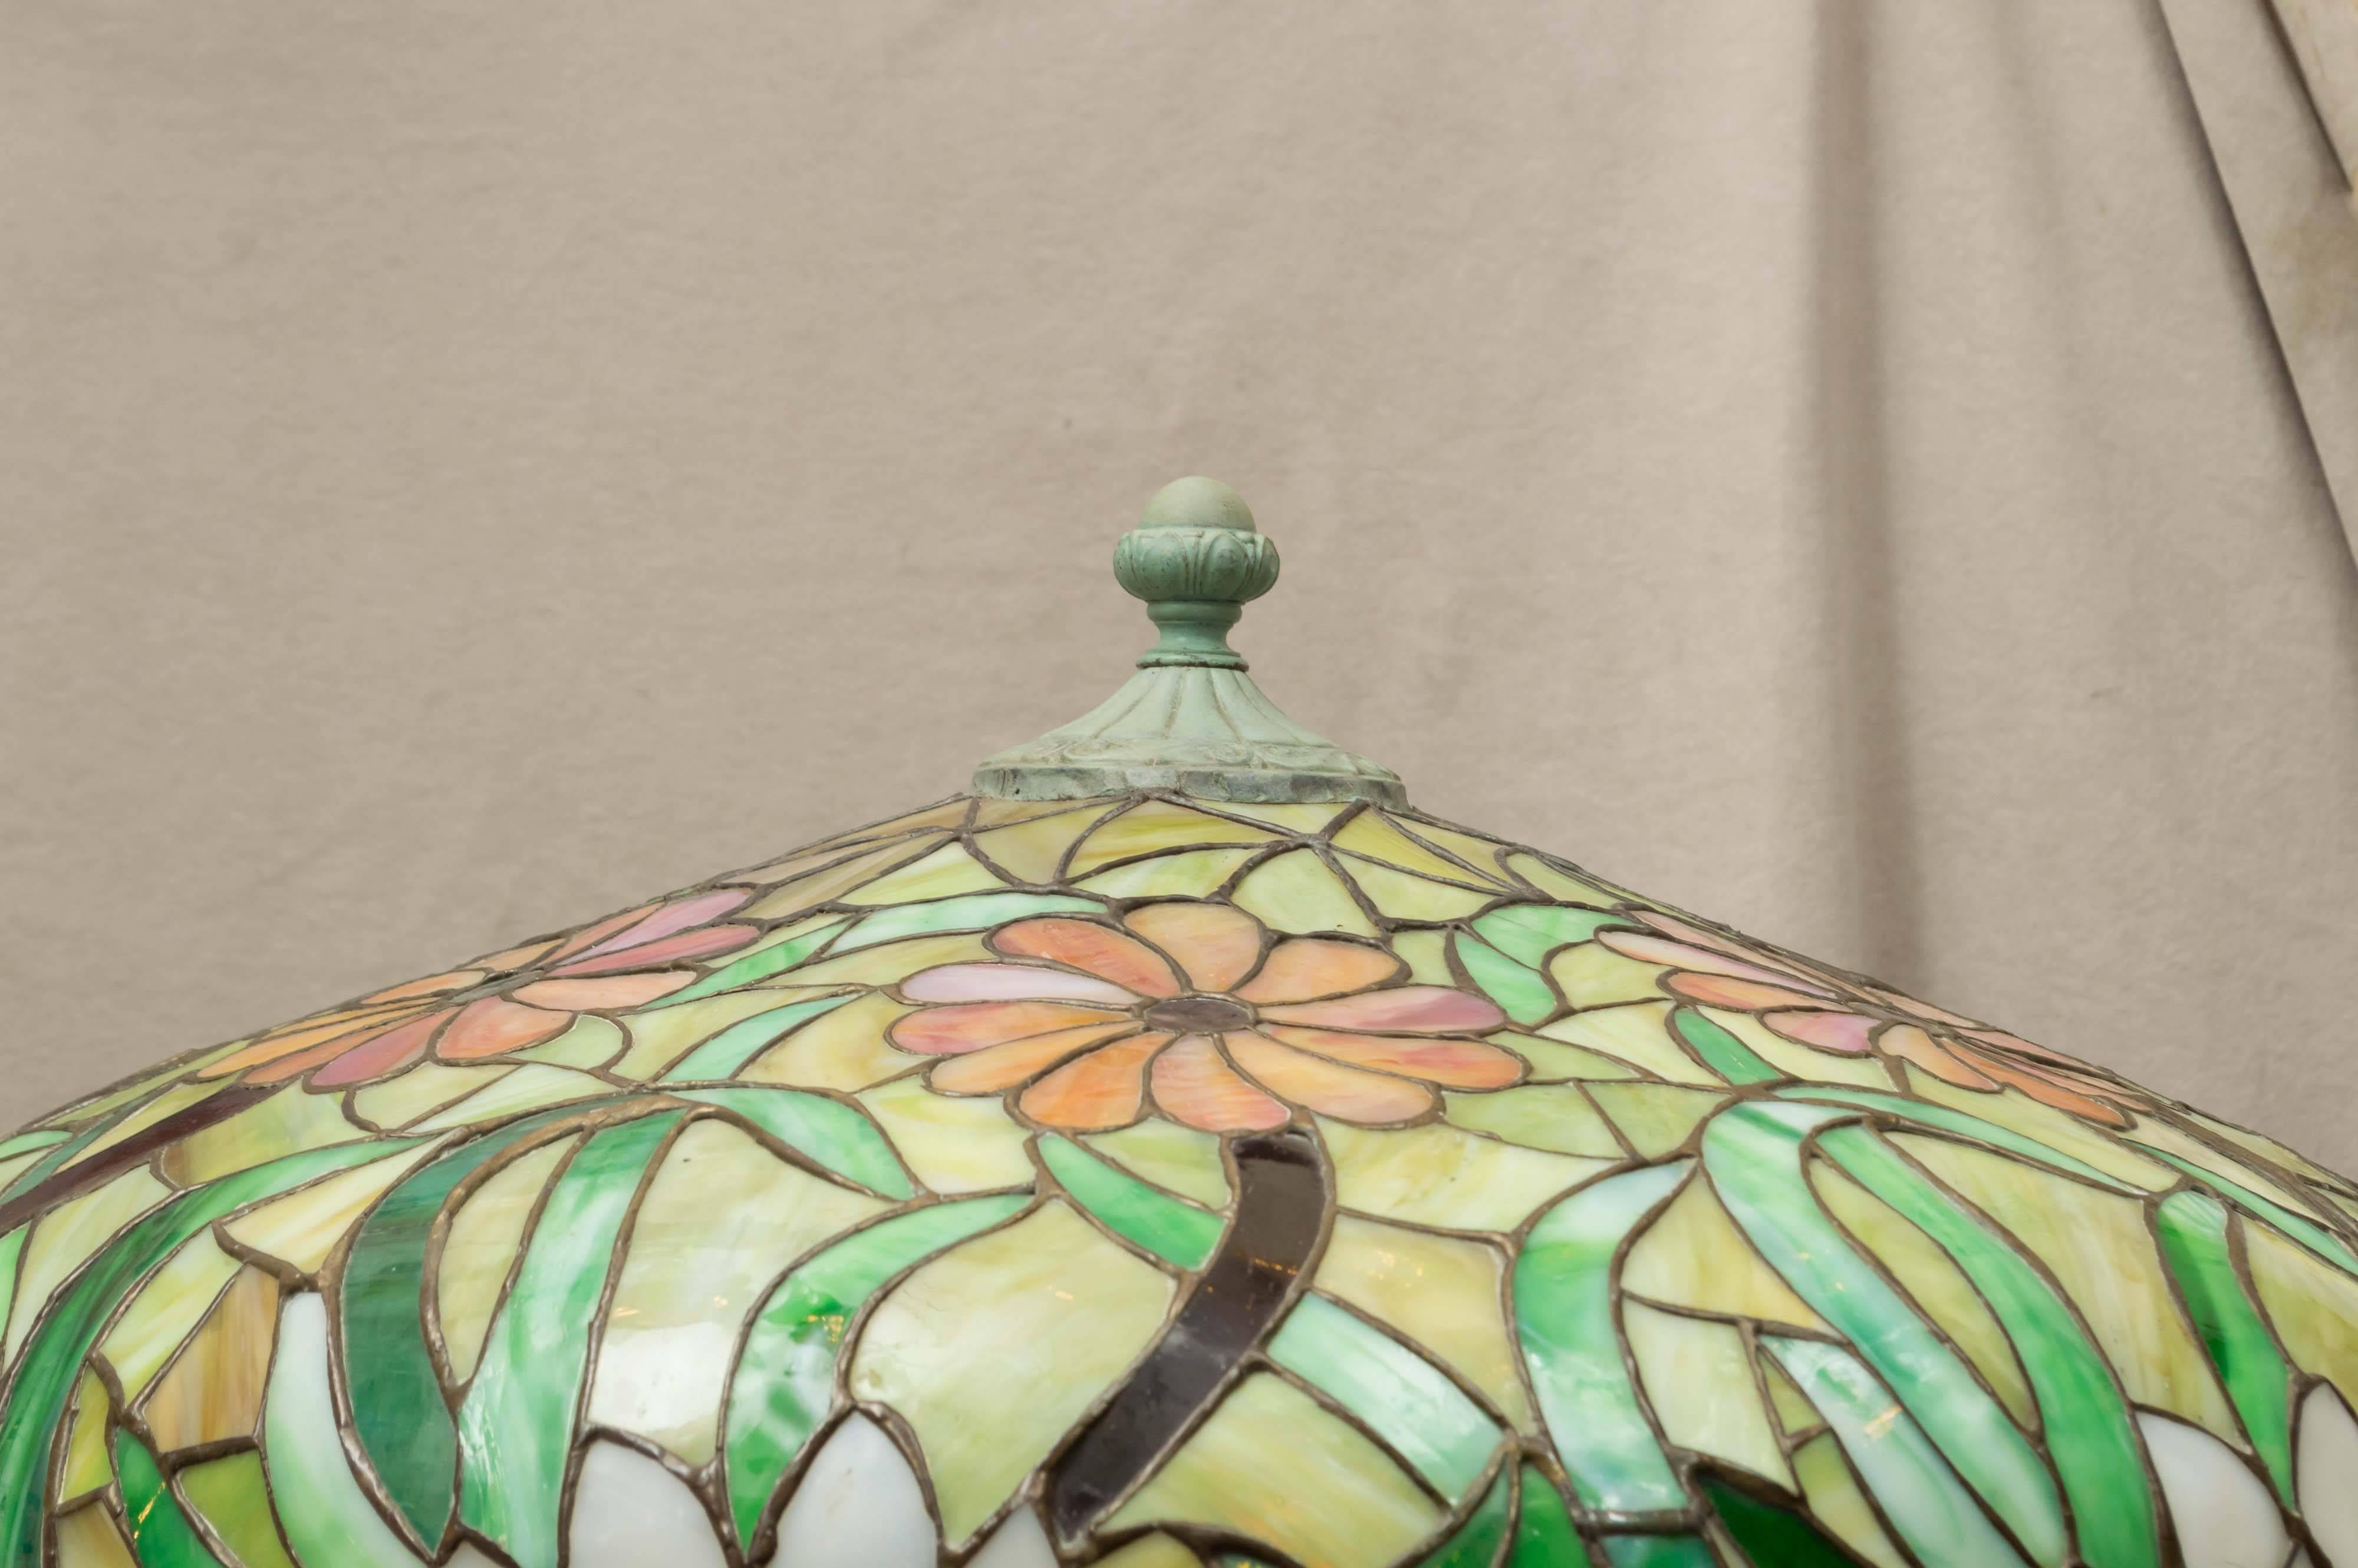 American Large Leaded Glass Table Lamp, circa 1910 by the Miller Lamp Company